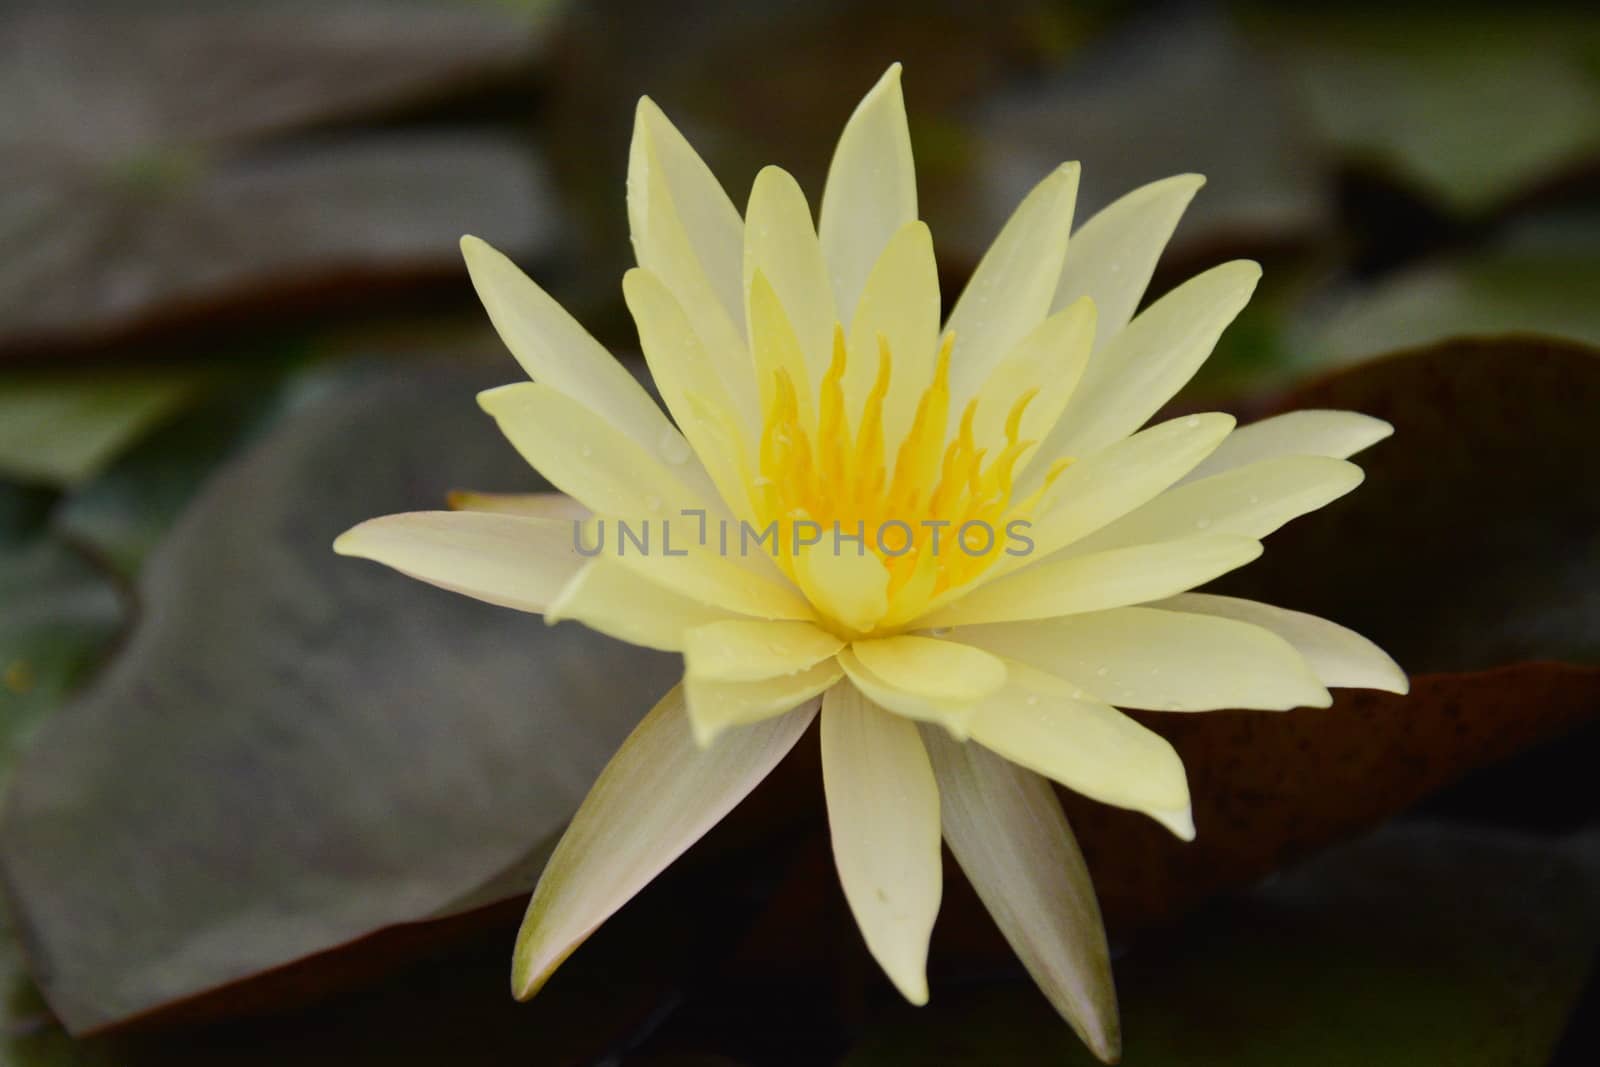 The lotus in the flower bloom is very beautiful. by photomtheart